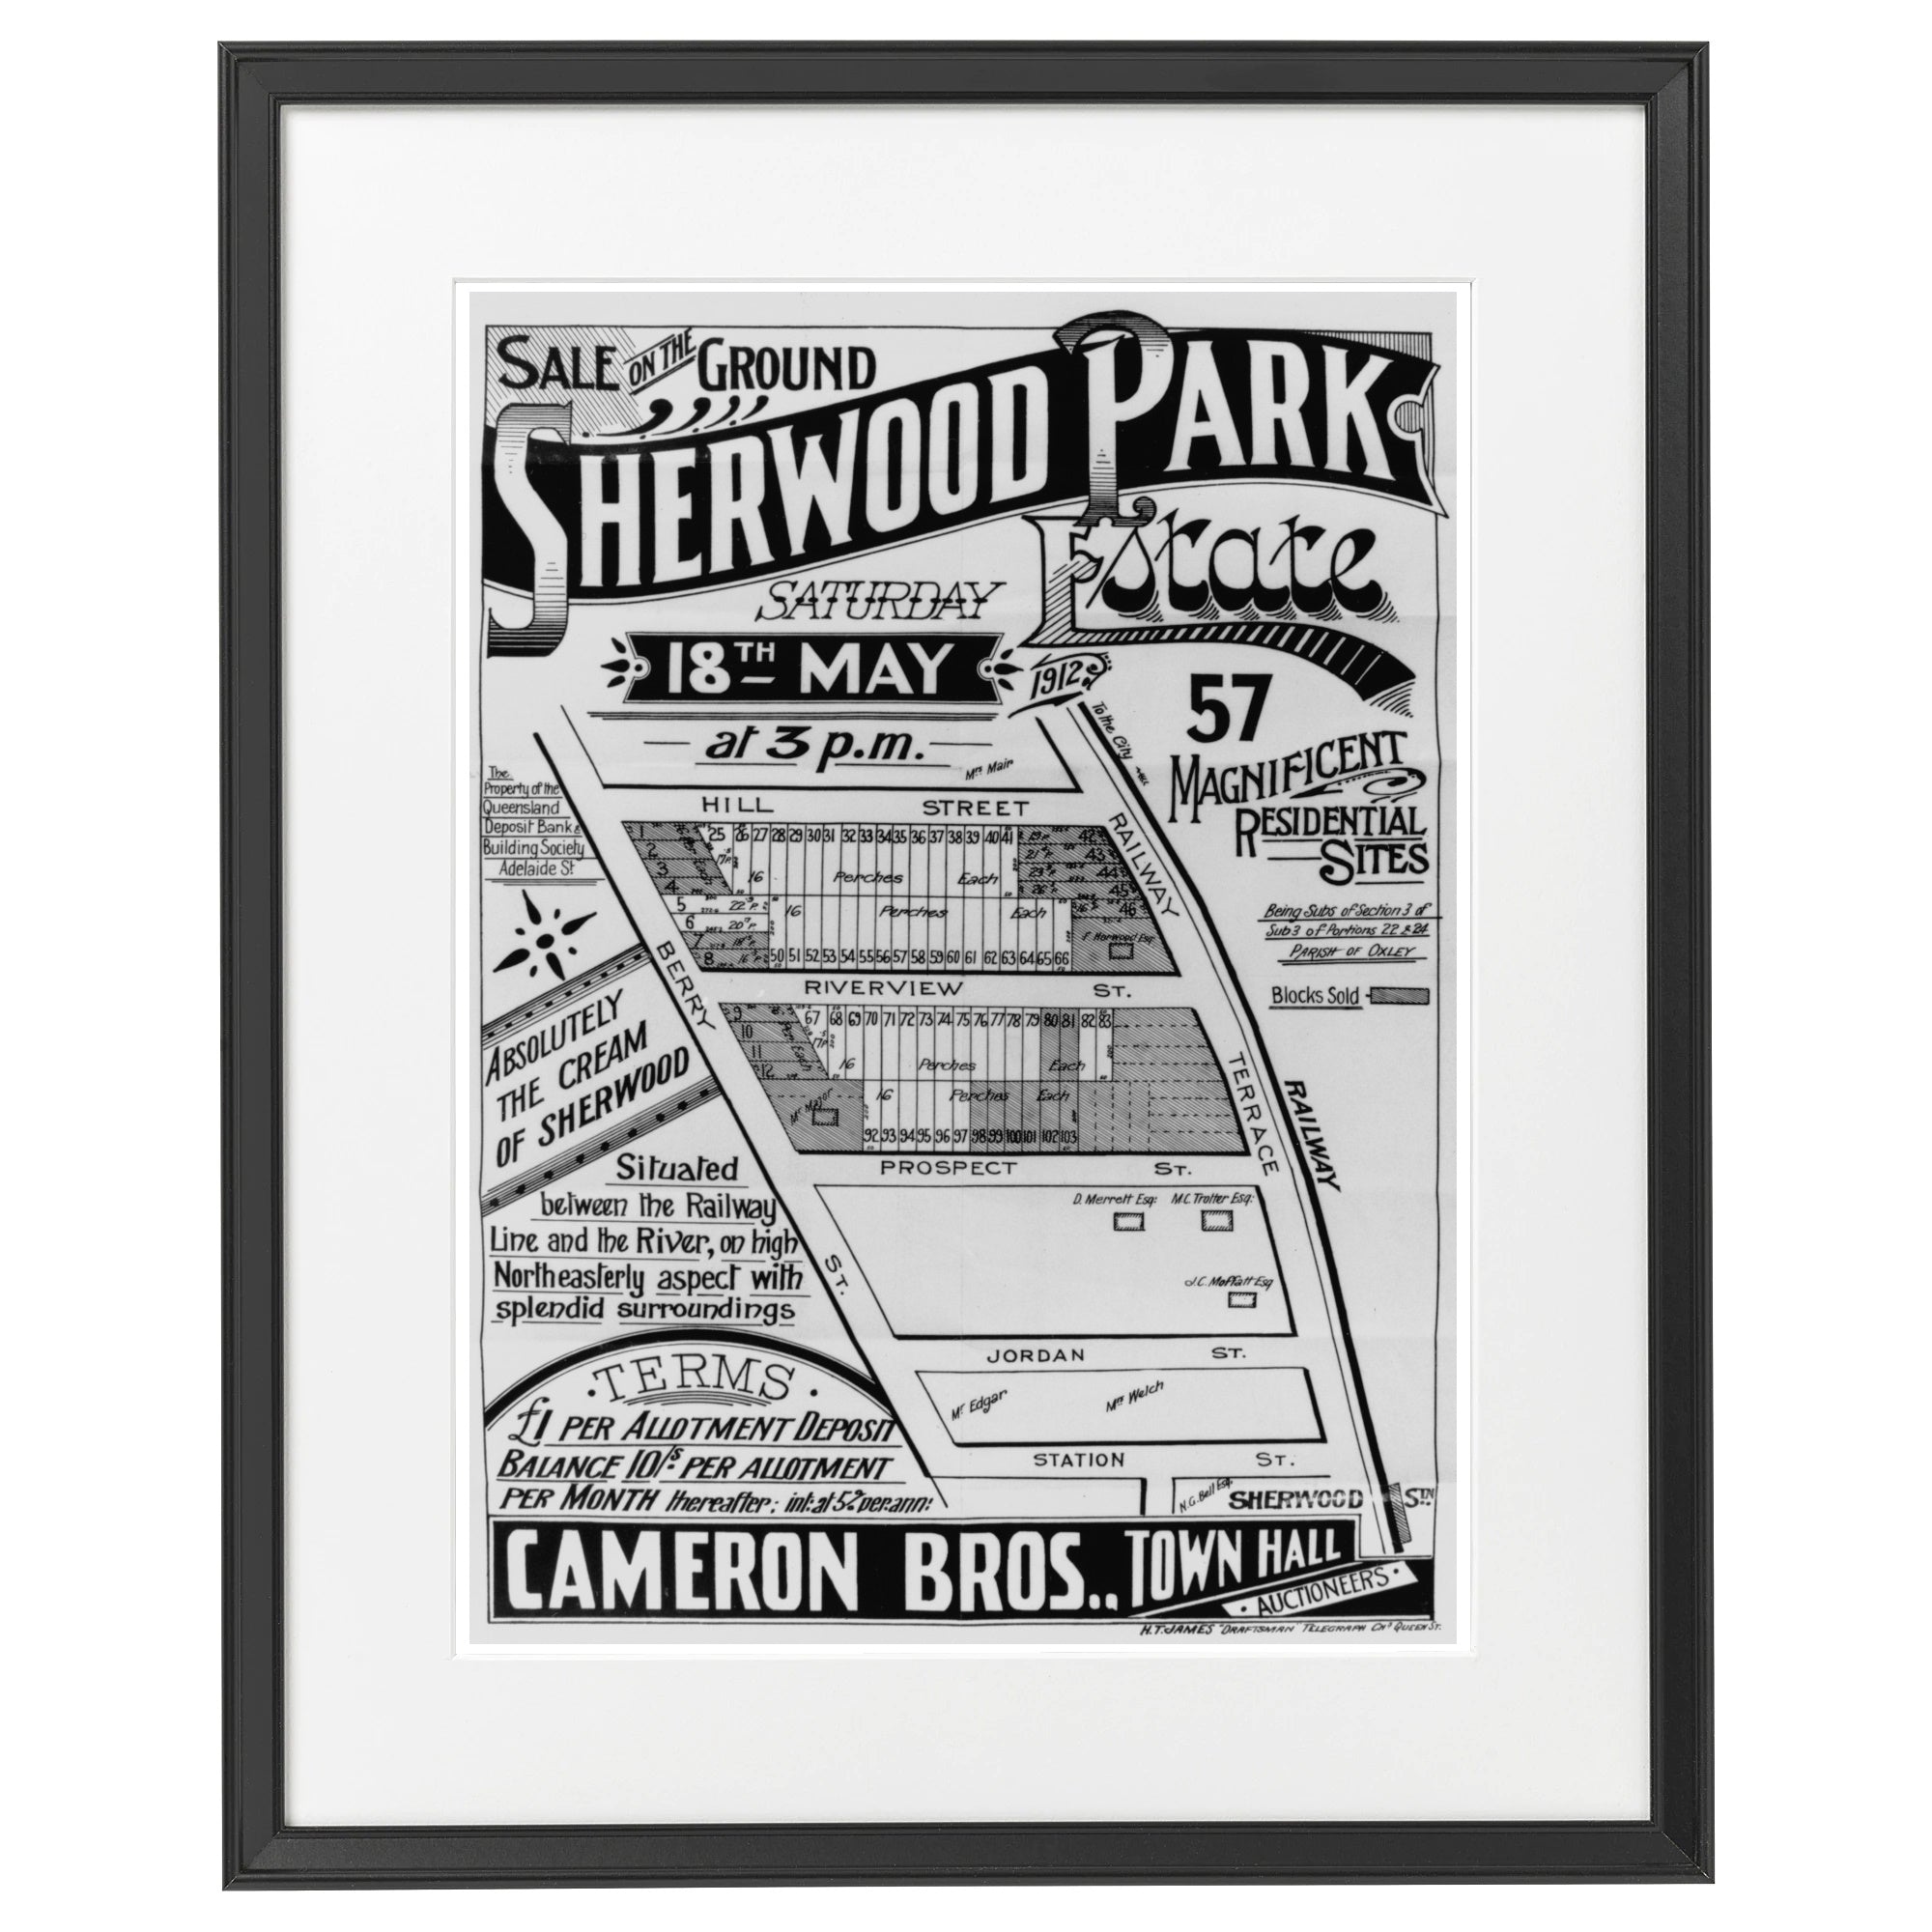 1912 Sherwood Park Estate - 111 years ago today